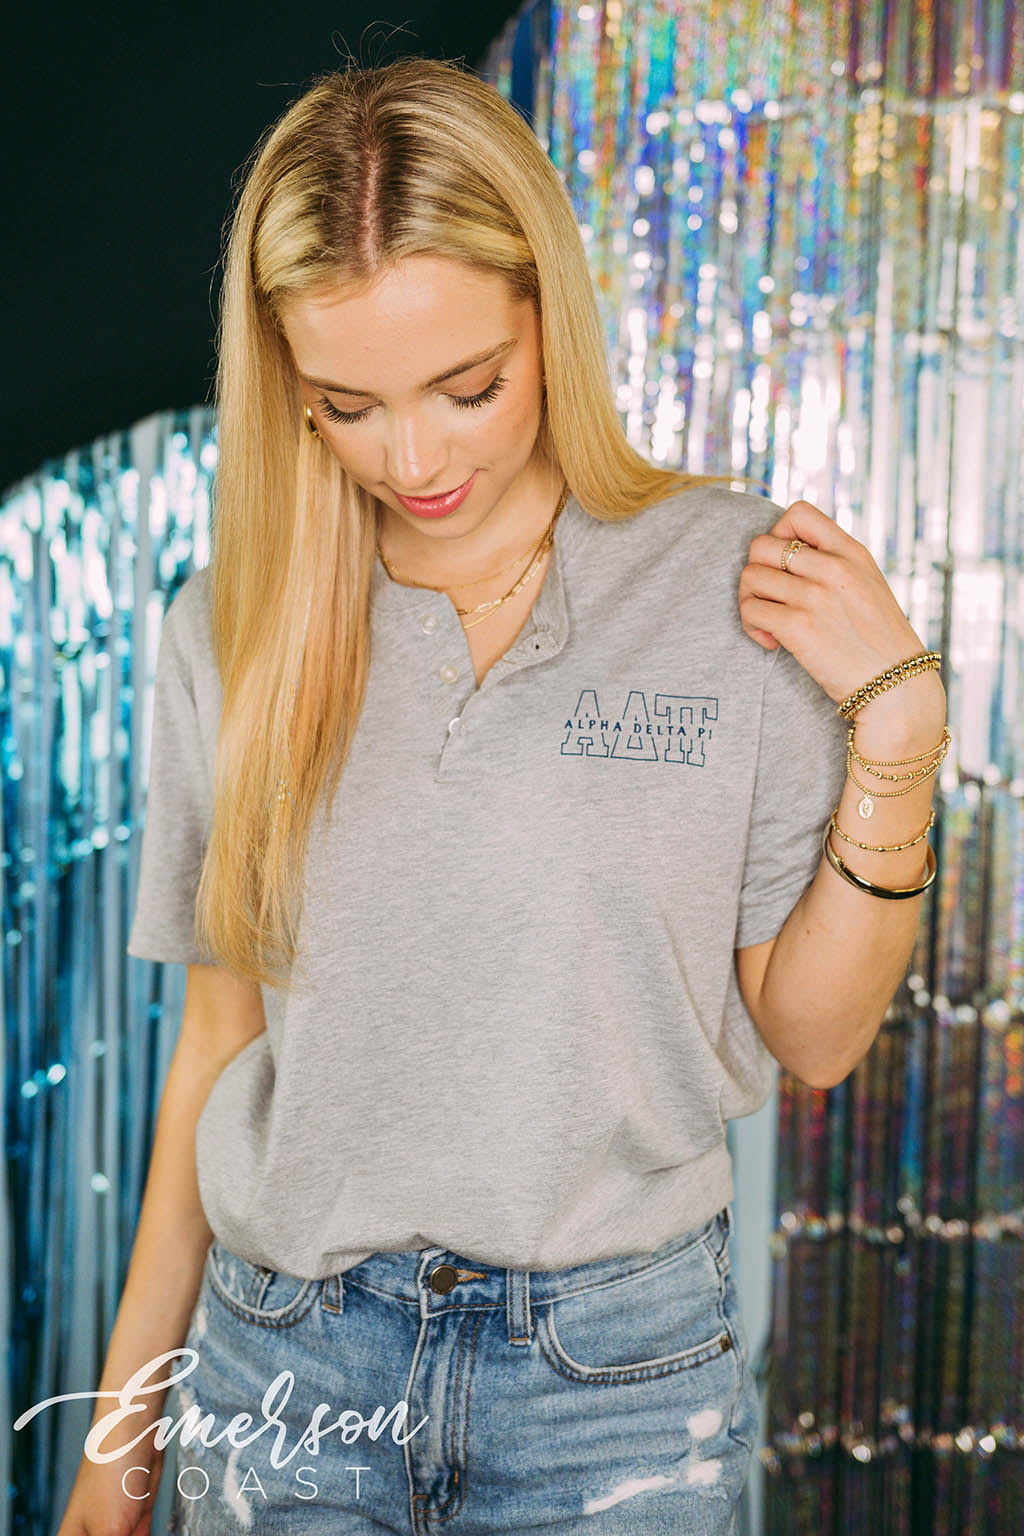 Girl wears light gray henley with ADPi letters on left chest.